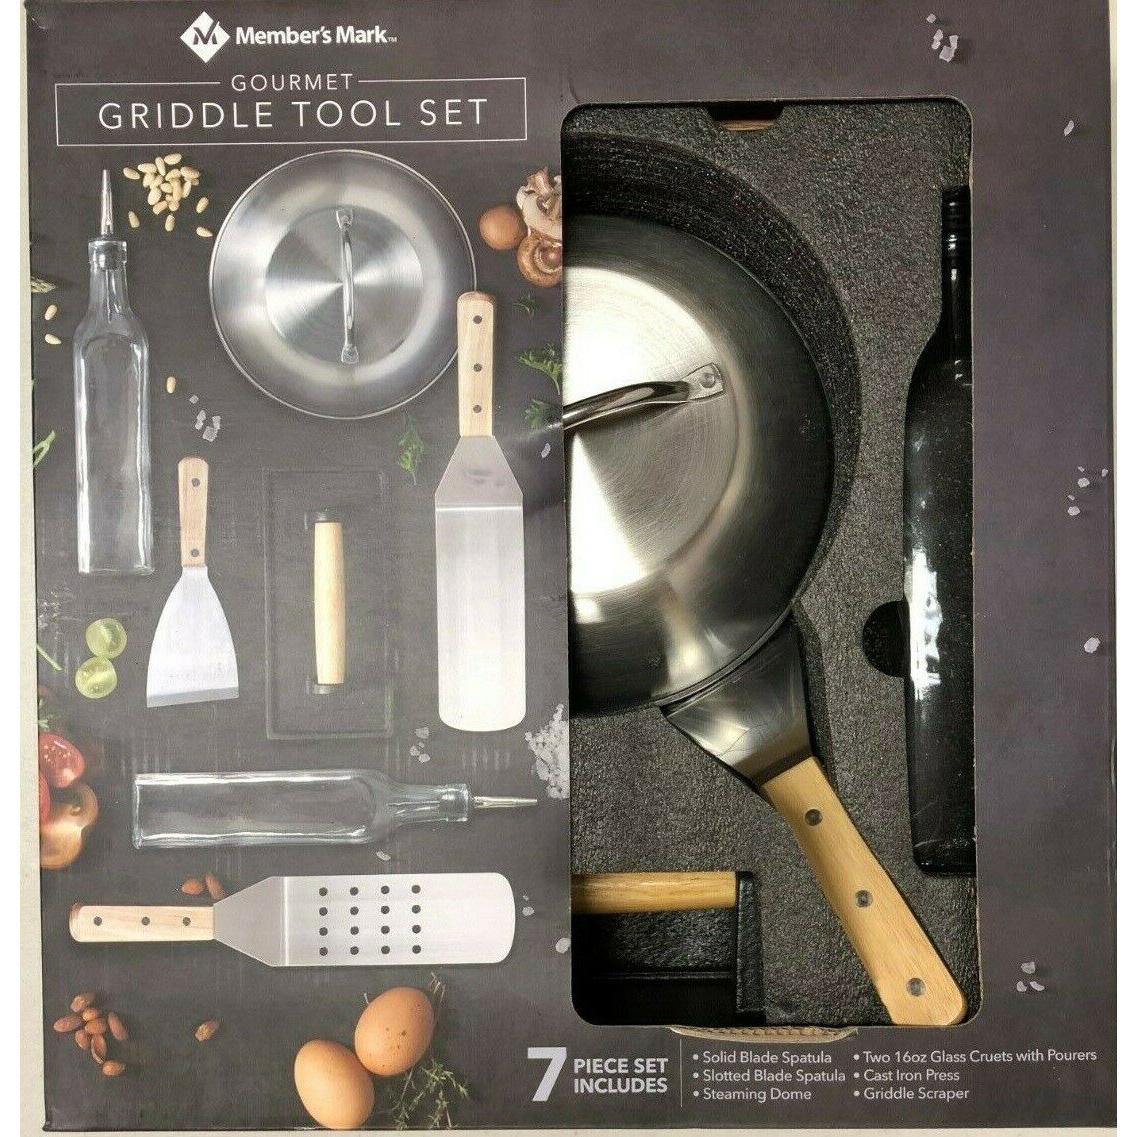 7-Piece Members Mark Griddle Tool Set for $17.20 Shipped